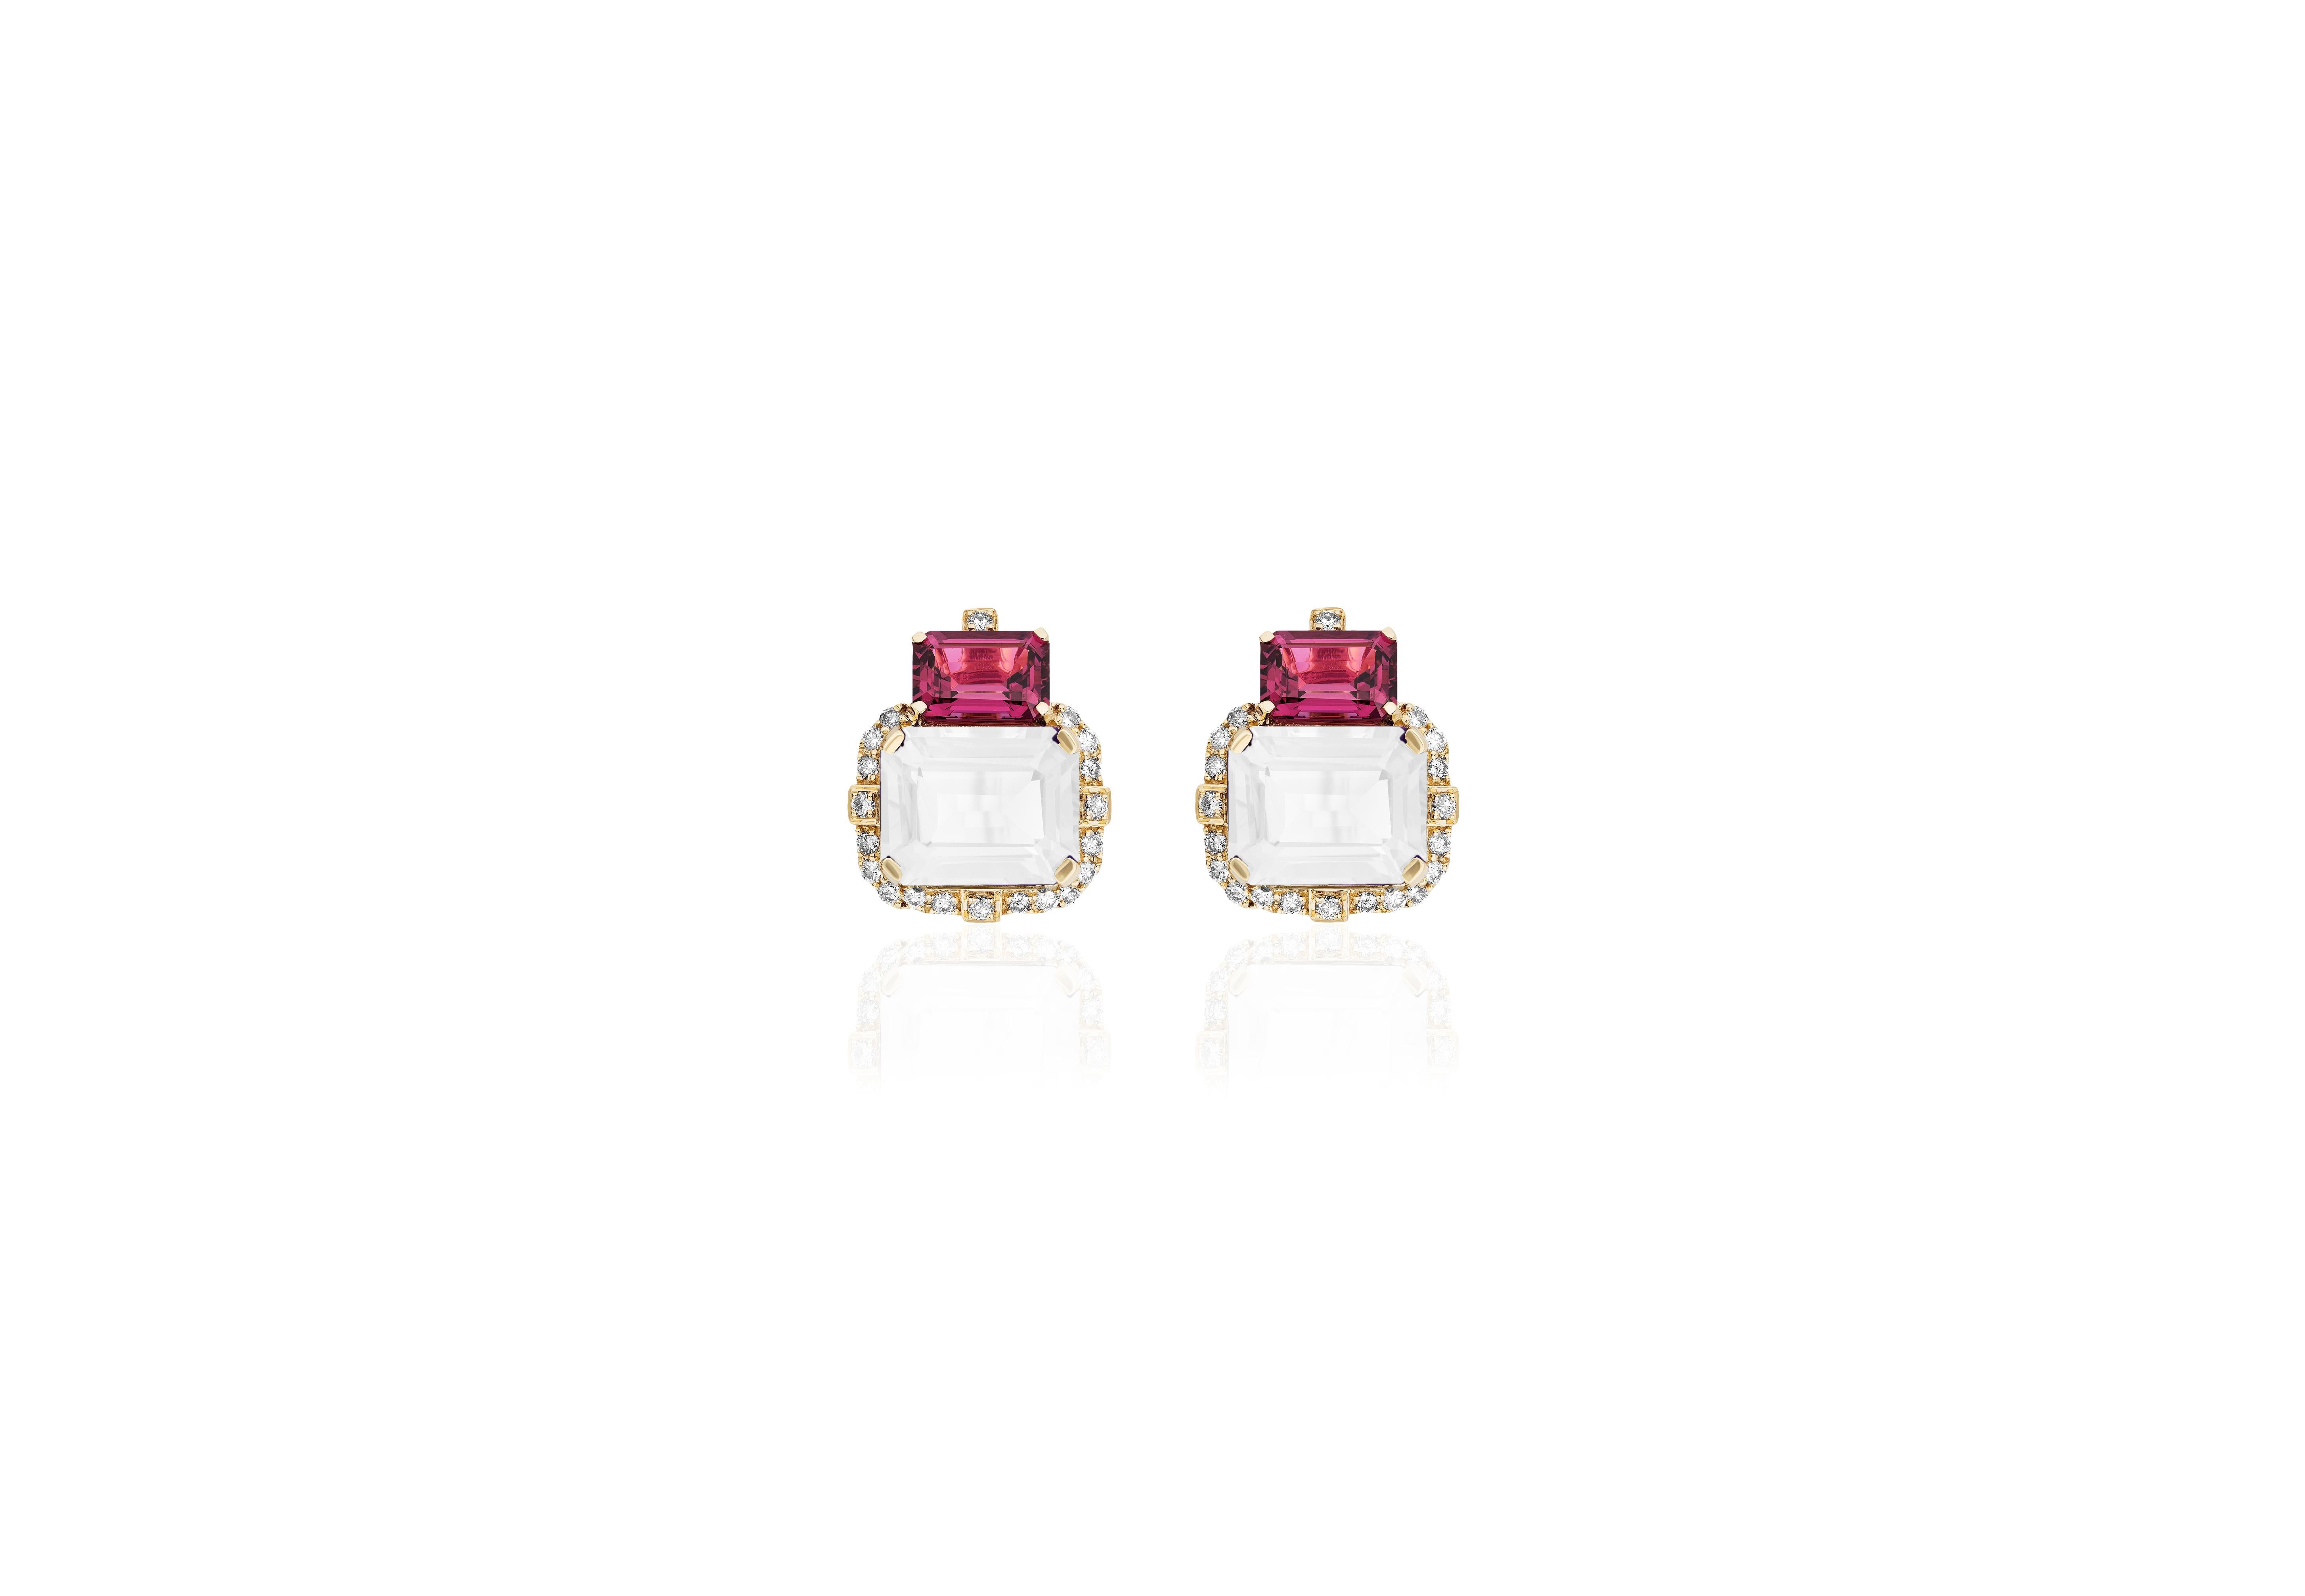 Introducing the captivating 2 Stone Garnet and Moon Quartz Emerald Cut Earrings with Diamonds in 18K Yellow Gold, a remarkable creation from the exquisite 'Gossip' Collection. Crafted with meticulous attention to detail, these earrings embody